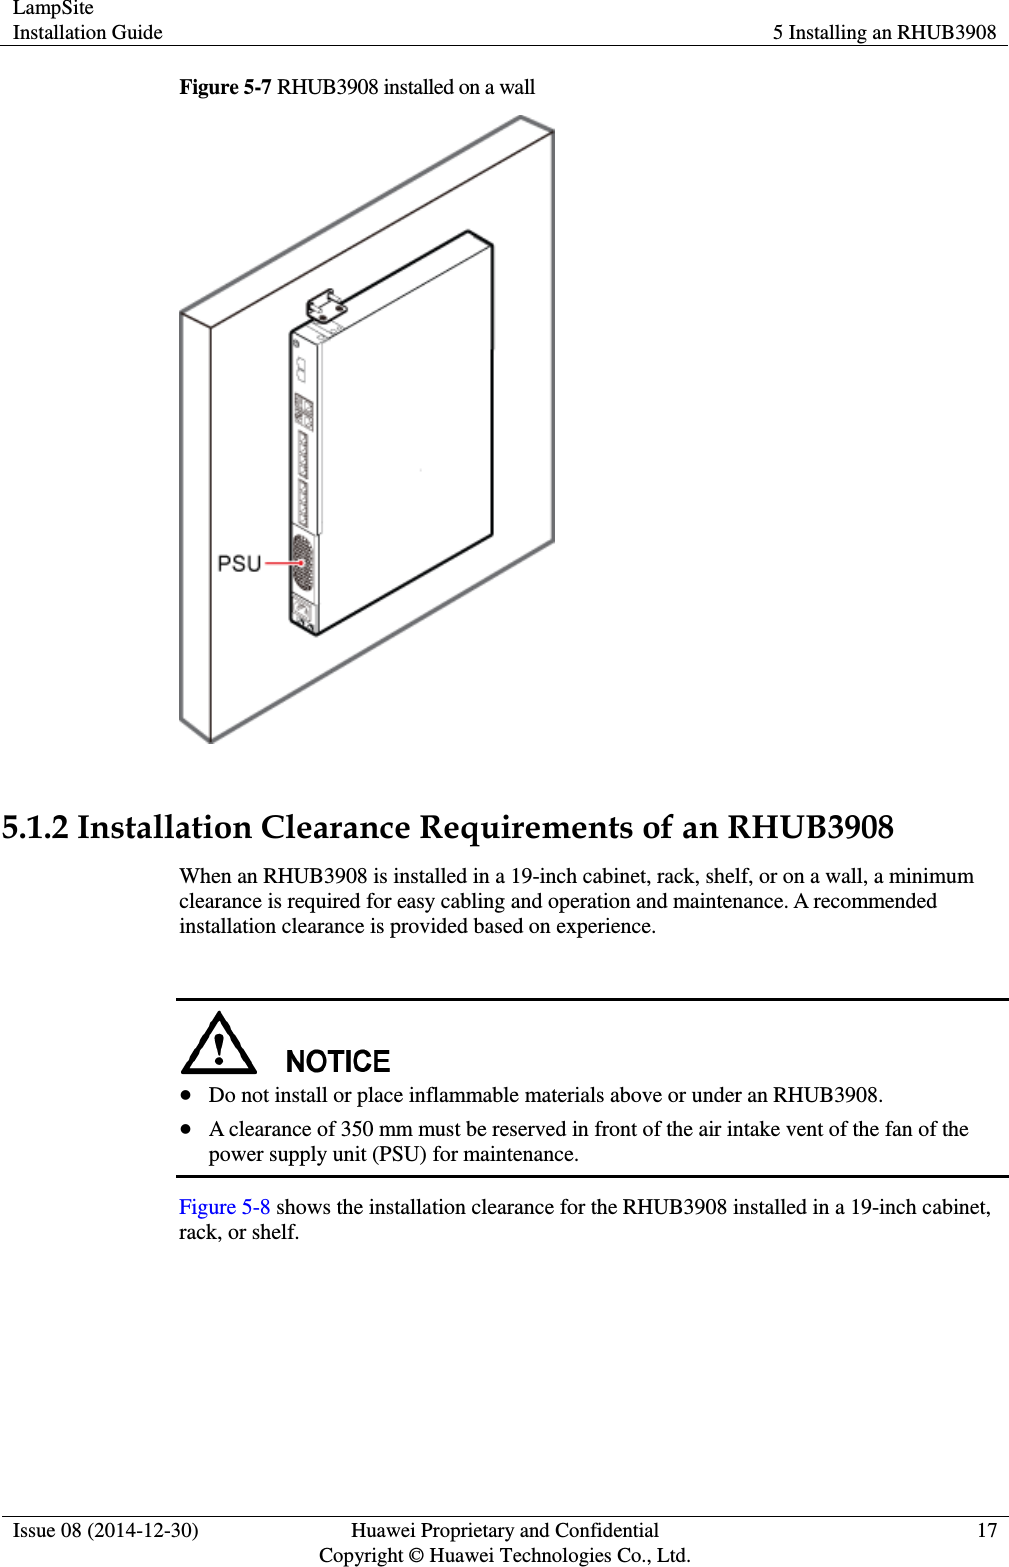 LampSite Installation Guide 5 Installing an RHUB3908  Issue 08 (2014-12-30) Huawei Proprietary and Confidential                                     Copyright © Huawei Technologies Co., Ltd. 17  Figure 5-7 RHUB3908 installed on a wall   5.1.2 Installation Clearance Requirements of an RHUB3908 When an RHUB3908 is installed in a 19-inch cabinet, rack, shelf, or on a wall, a minimum clearance is required for easy cabling and operation and maintenance. A recommended installation clearance is provided based on experience.      Do not install or place inflammable materials above or under an RHUB3908.  A clearance of 350 mm must be reserved in front of the air intake vent of the fan of the power supply unit (PSU) for maintenance. Figure 5-8 shows the installation clearance for the RHUB3908 installed in a 19-inch cabinet, rack, or shelf.   